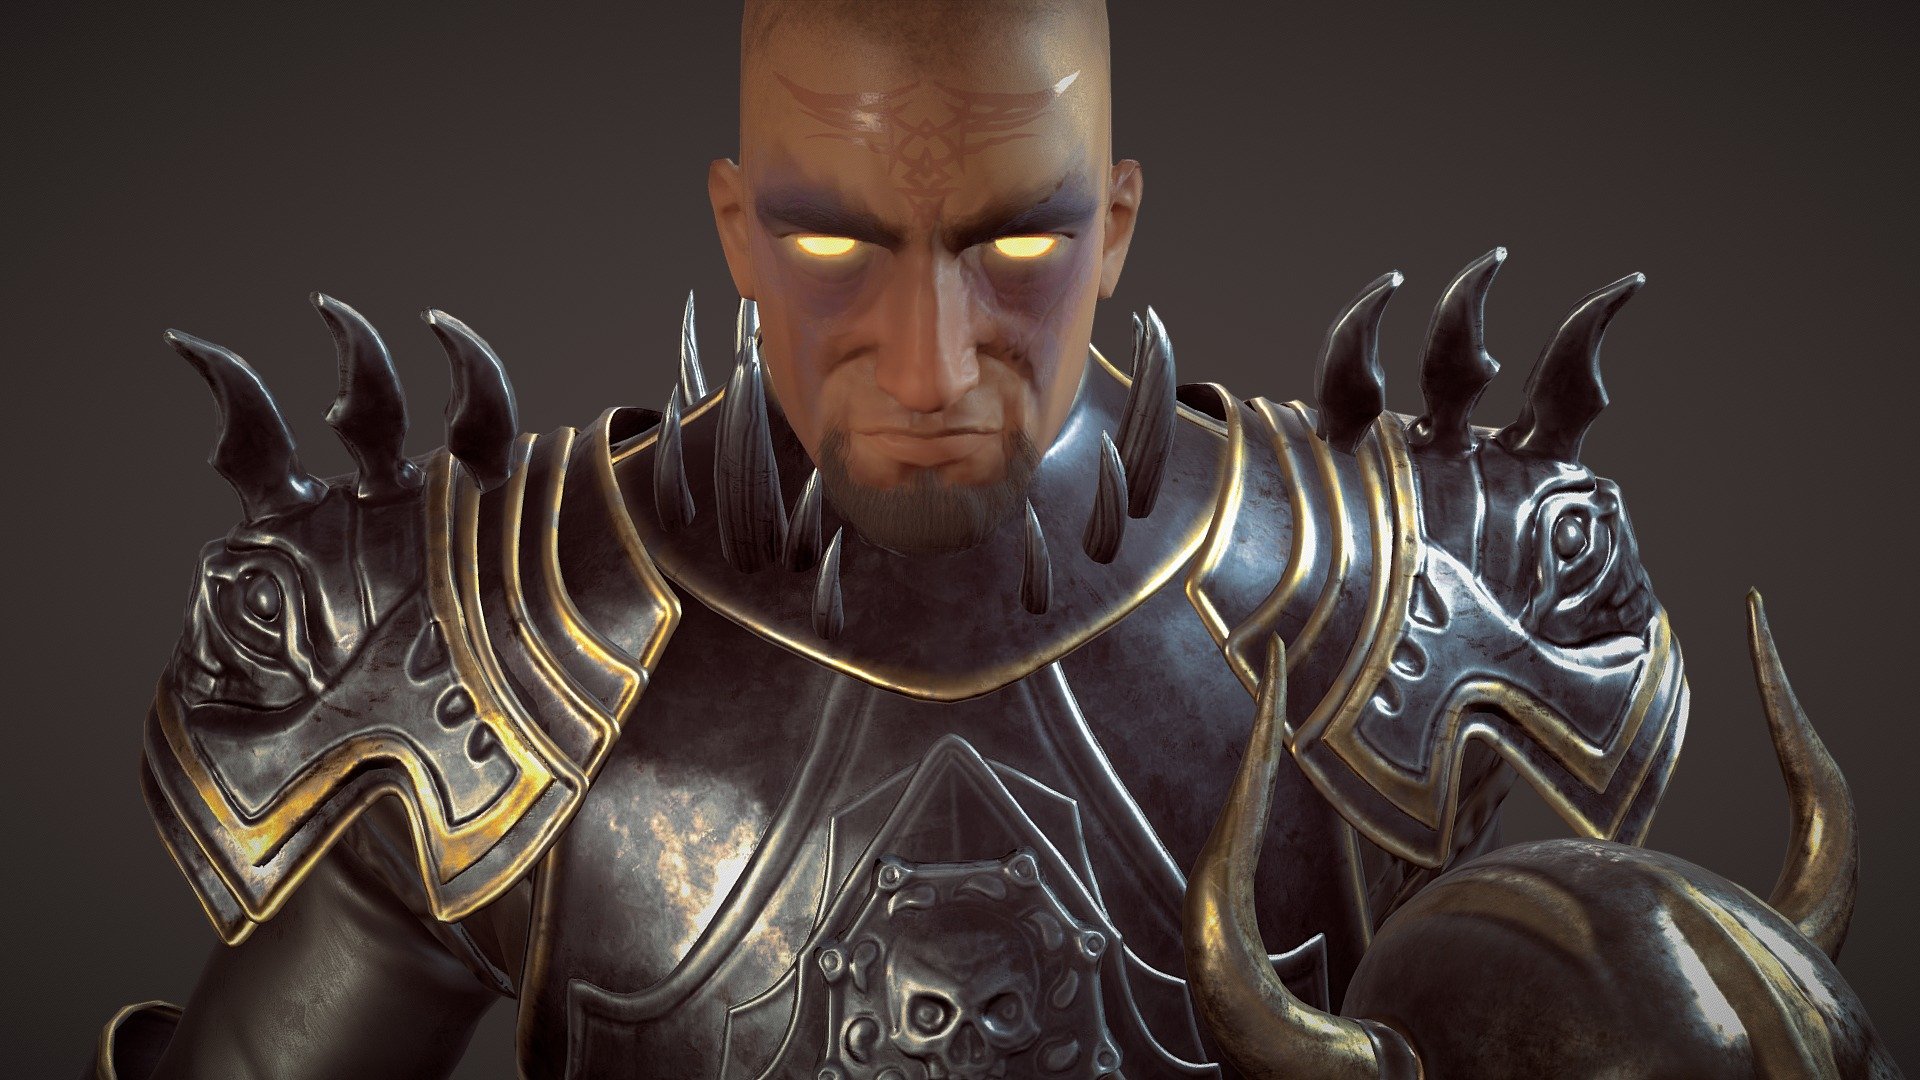 This is the infamous antihero from Baldur's Gate series known as Sarevok Anchev enjoy!

You can see more of the workflow here: https://www.artstation.com/artwork/4Xw0Gn

Reference Picture:  - Deathbringer - 3D model by DimChryss 3d model